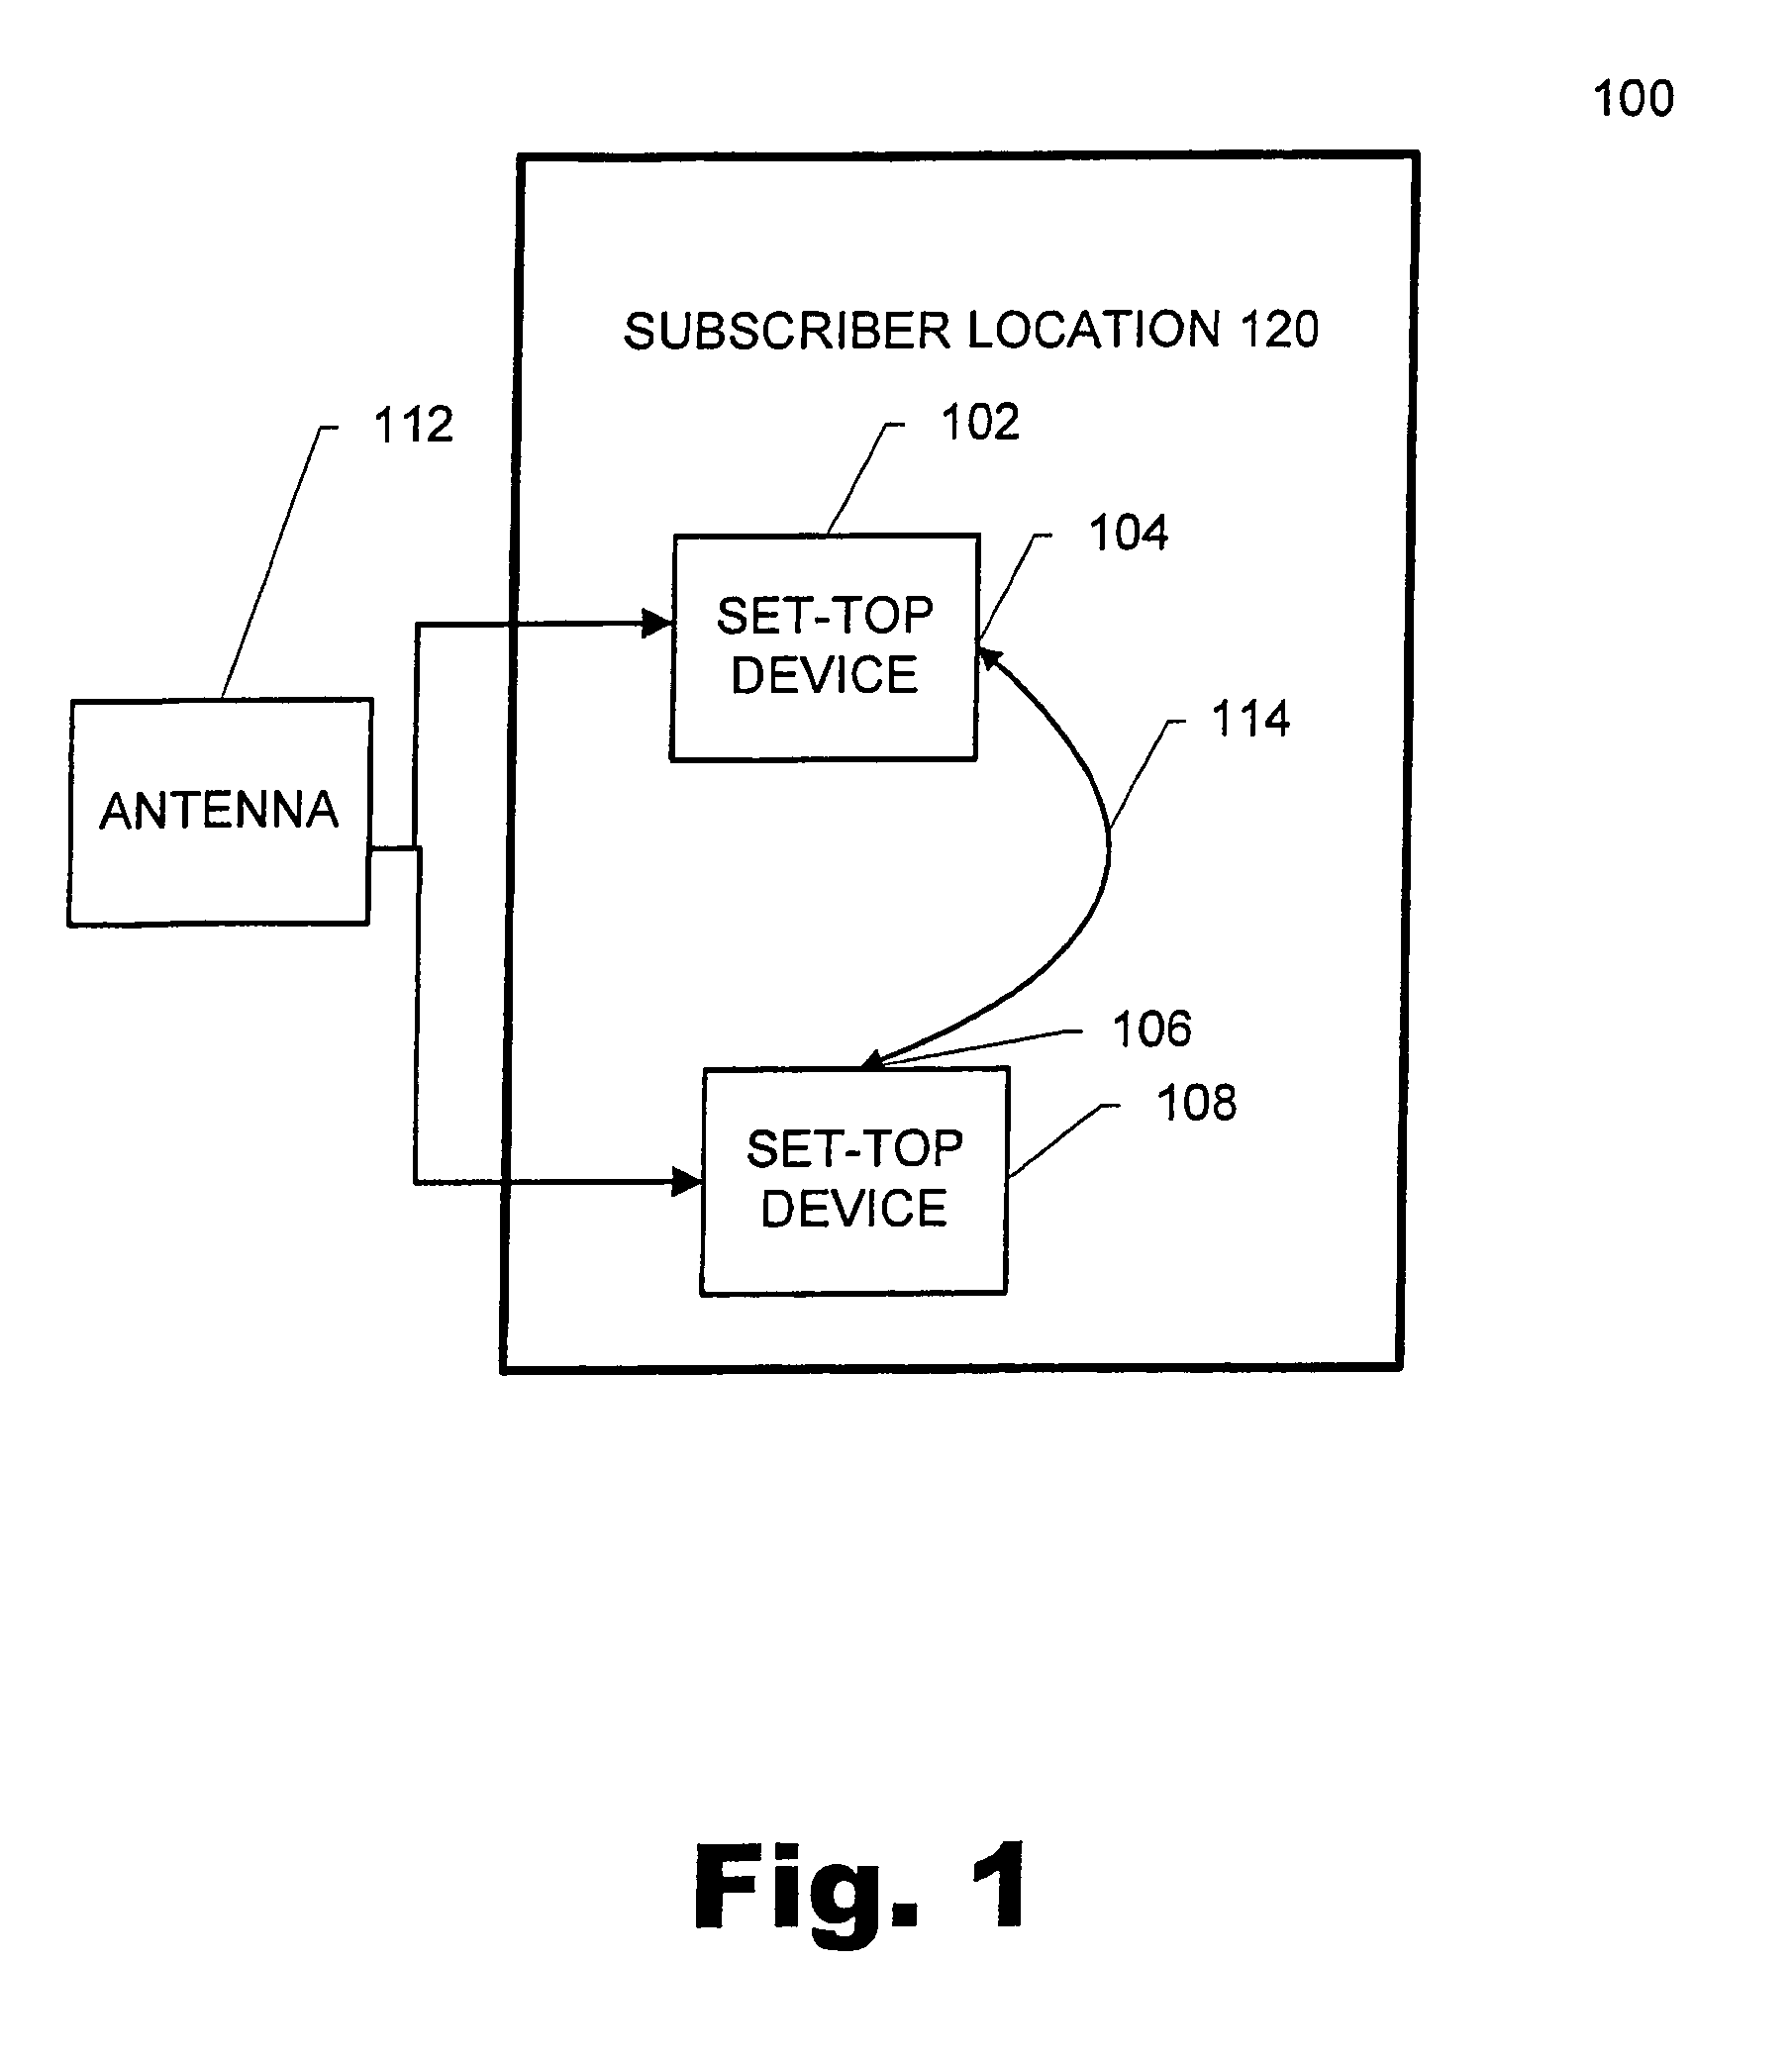 Method and apparatus for authorizing an additional set-top device in a satellite television network